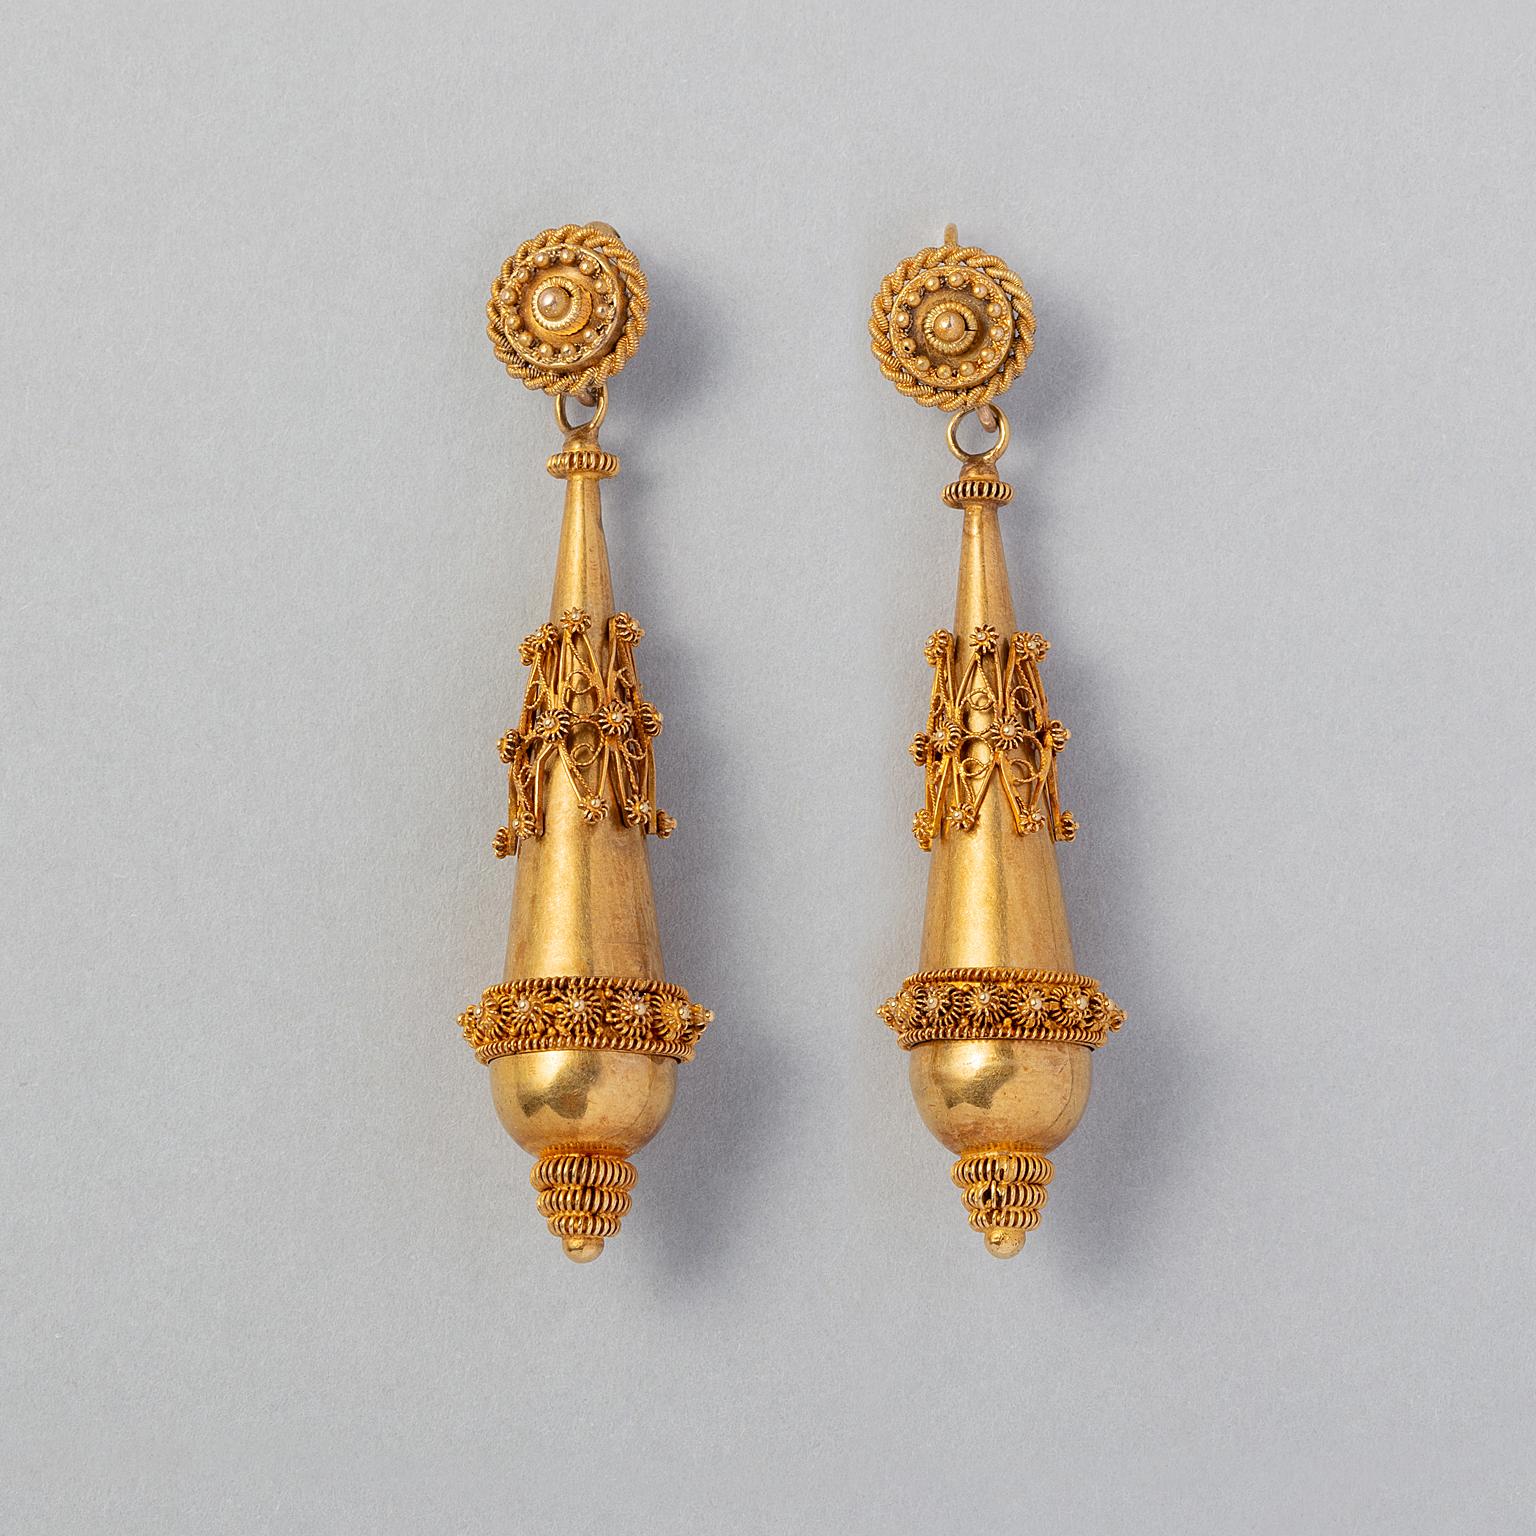 A pair of 15 carat yellow gold torpedo earrings with long dropshaped, hollow gold pendants with a seprate loose gold band around the middle with detailed filigrain. Above and at the bottom are more filigrain decorations. On the top is a round 